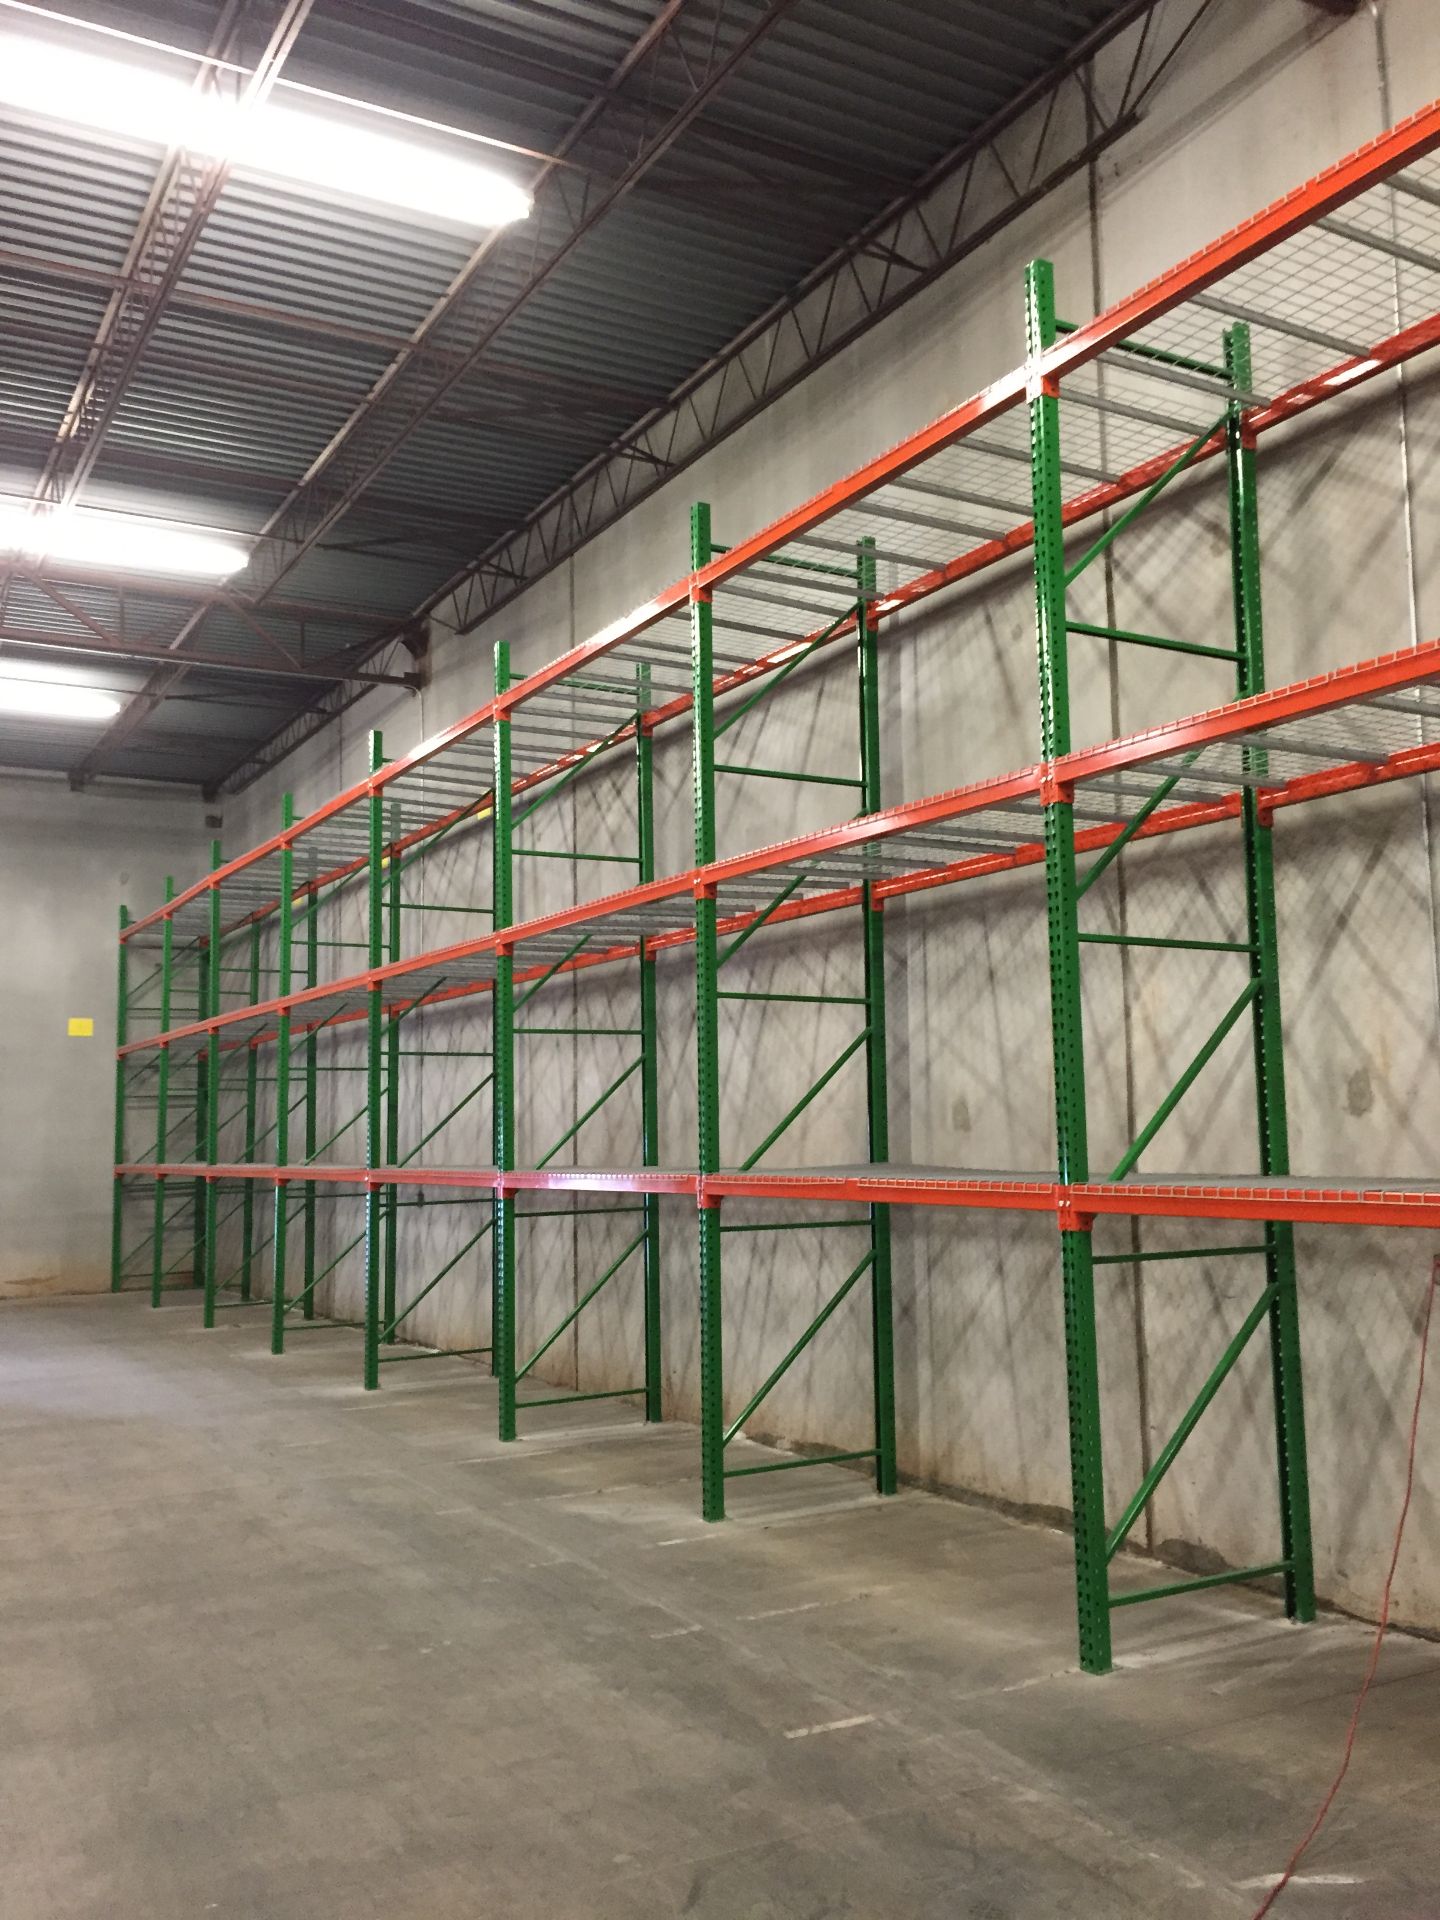 10 SECTIONS OF TEARDROP STYLE PALLET RACK, LIKE NEW, SIZE: 16'H x 42"D X 8'W - Image 2 of 5